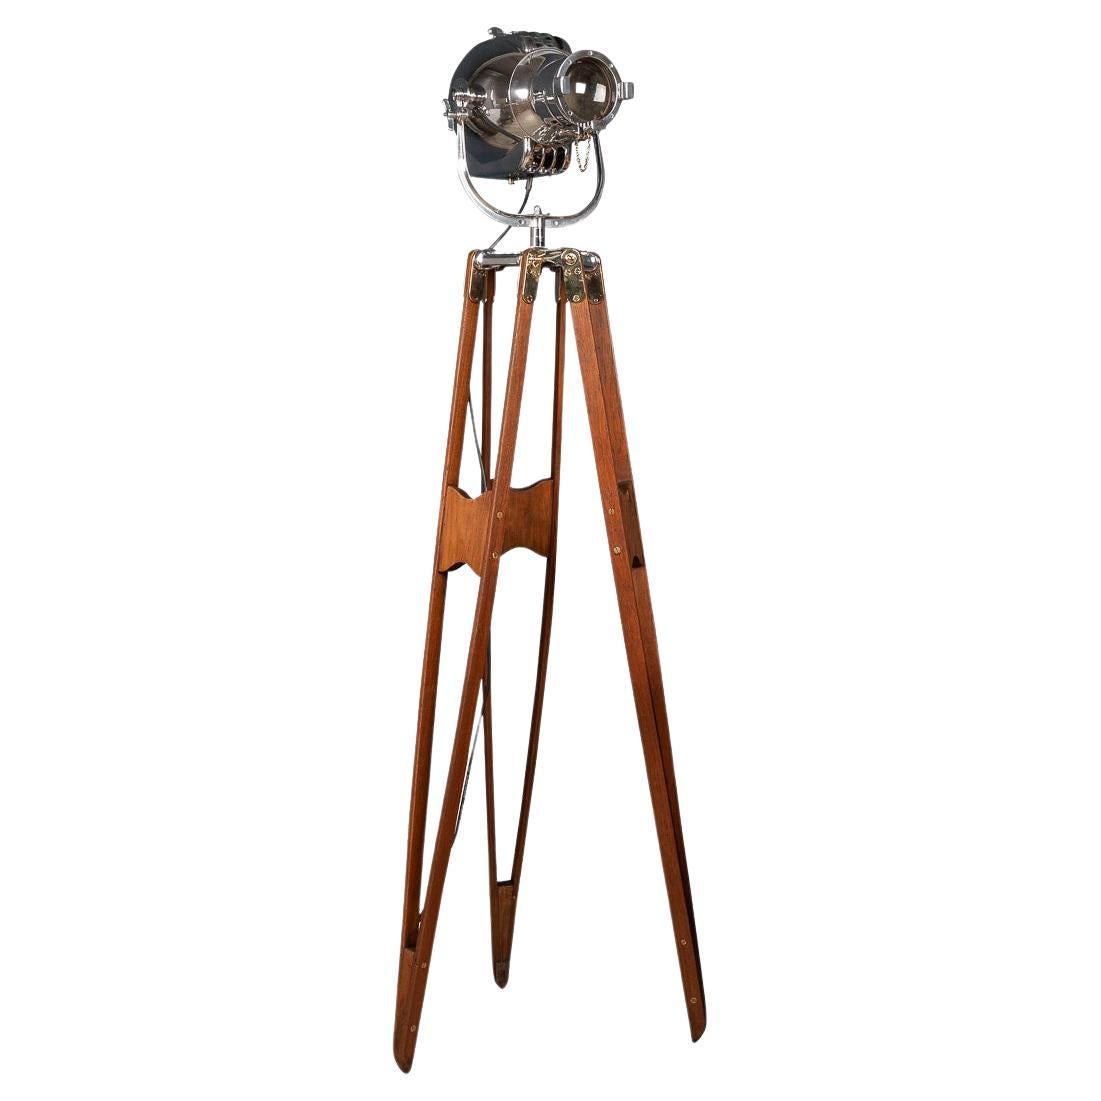 20th Century English "Strand Electric" Theatre Lamp on a Tripod Stand